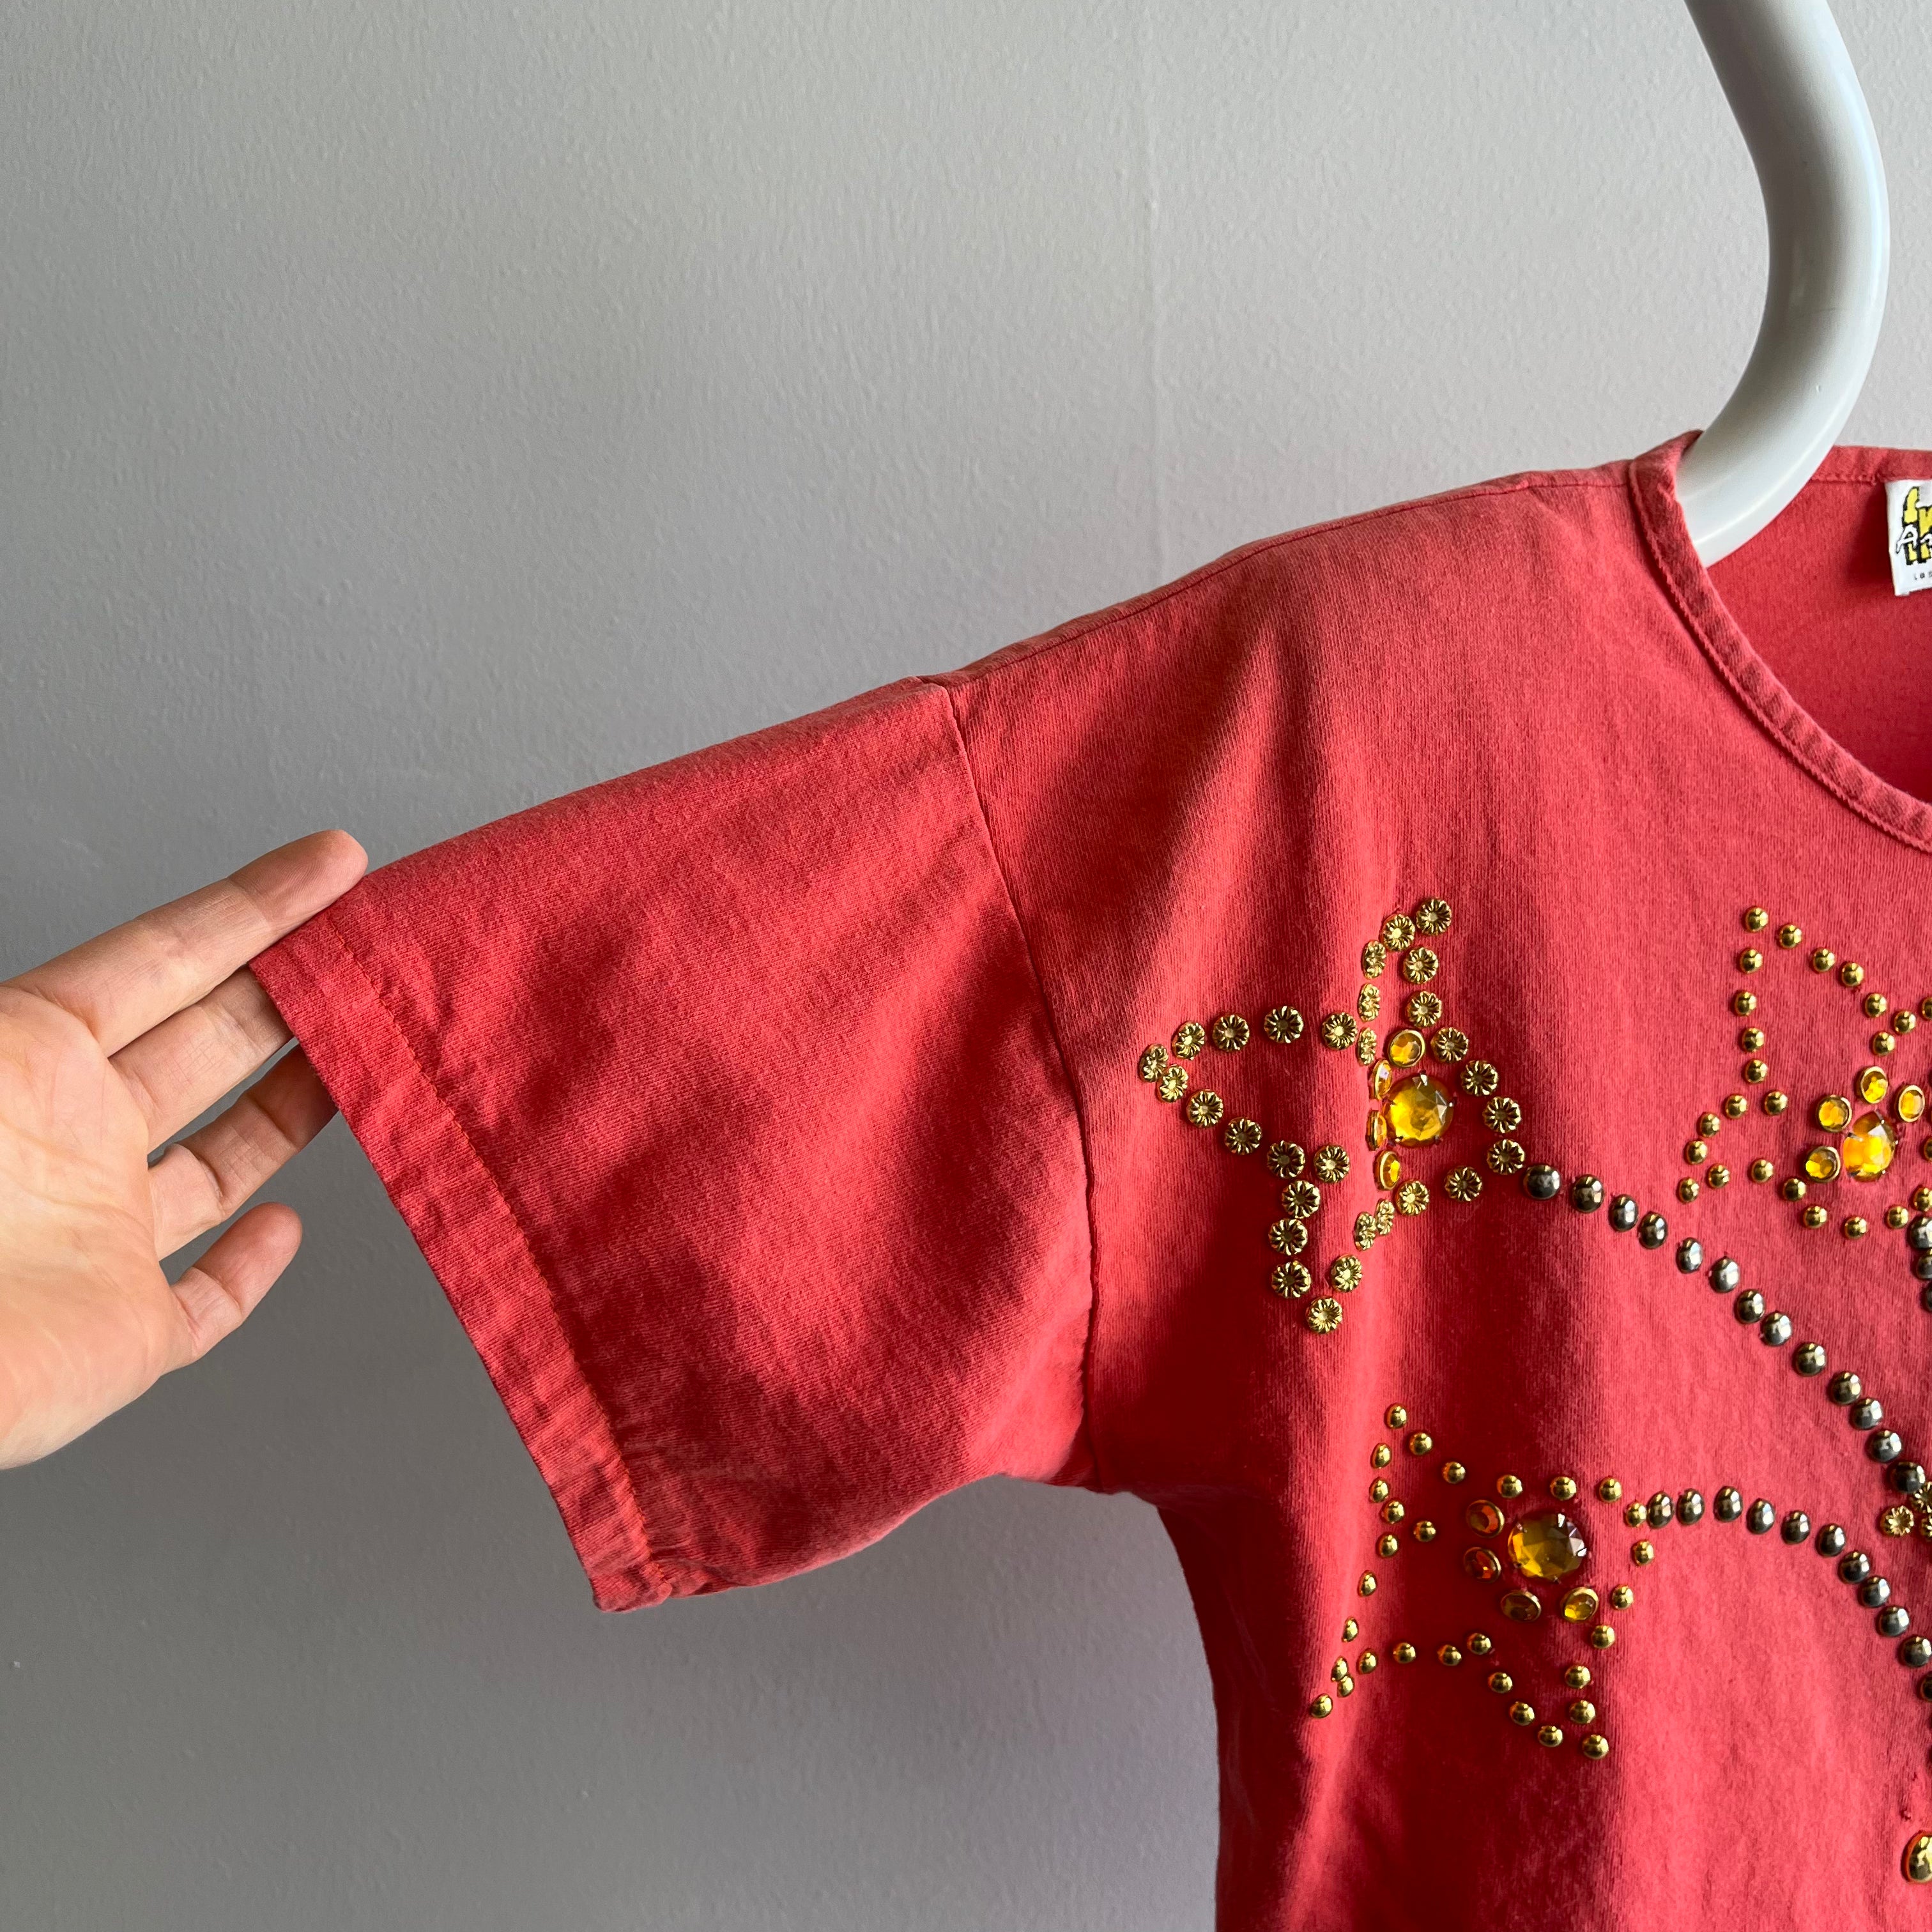 1980s Bedazzled T-Shirt with Shoulder Pads